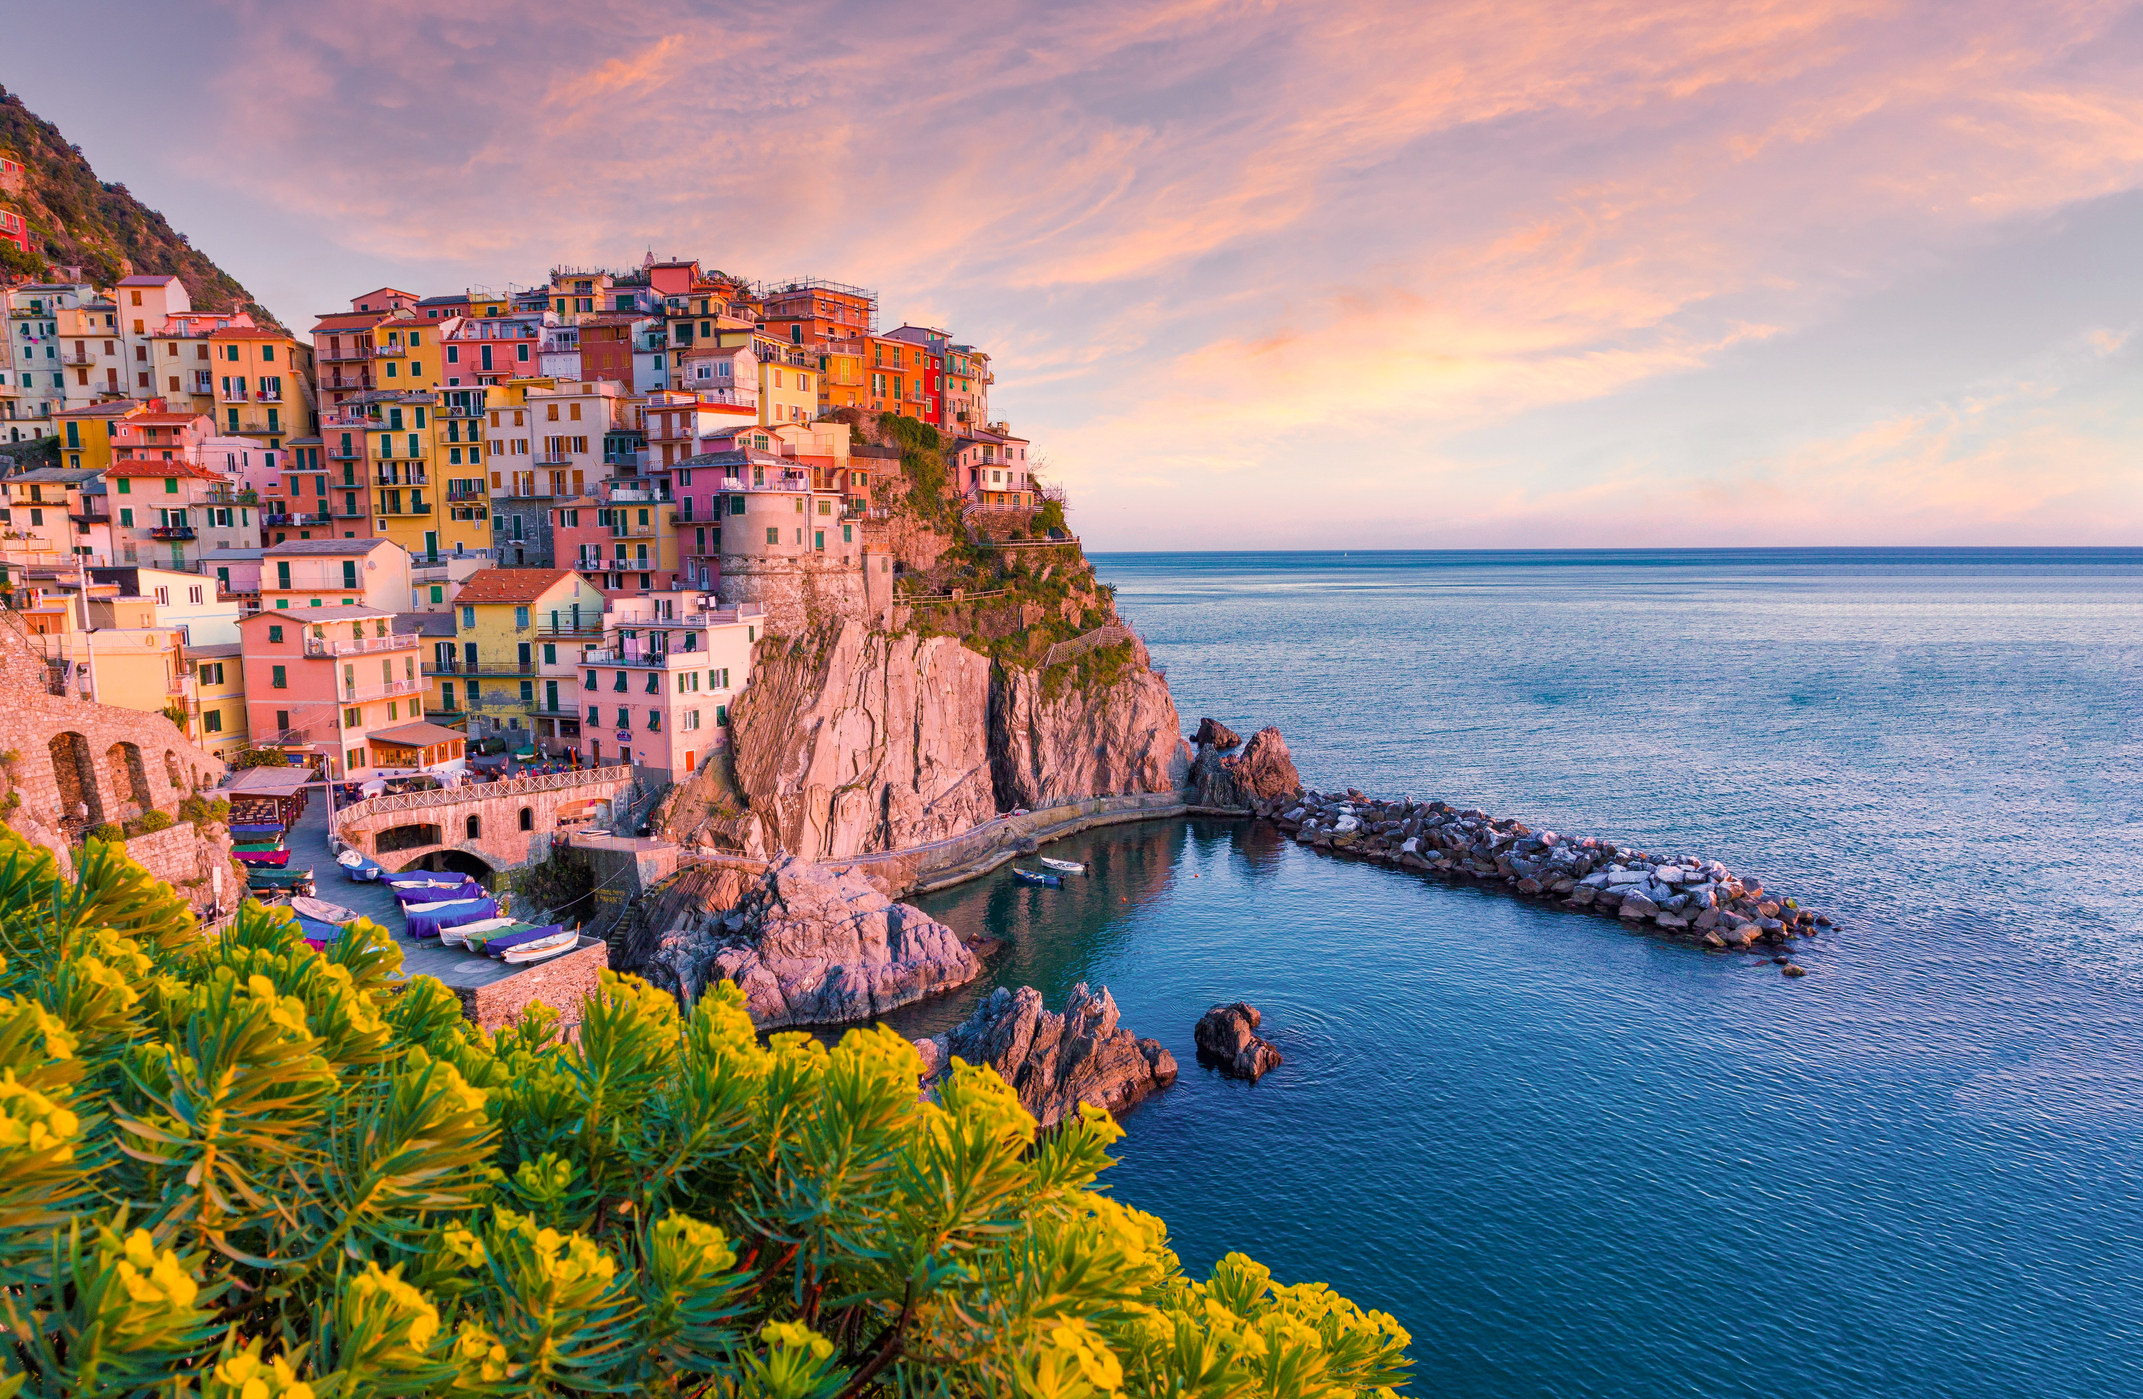 Sunset over Manarola, Cinque Terre, Liguria, Italy from an oceanside vantage point